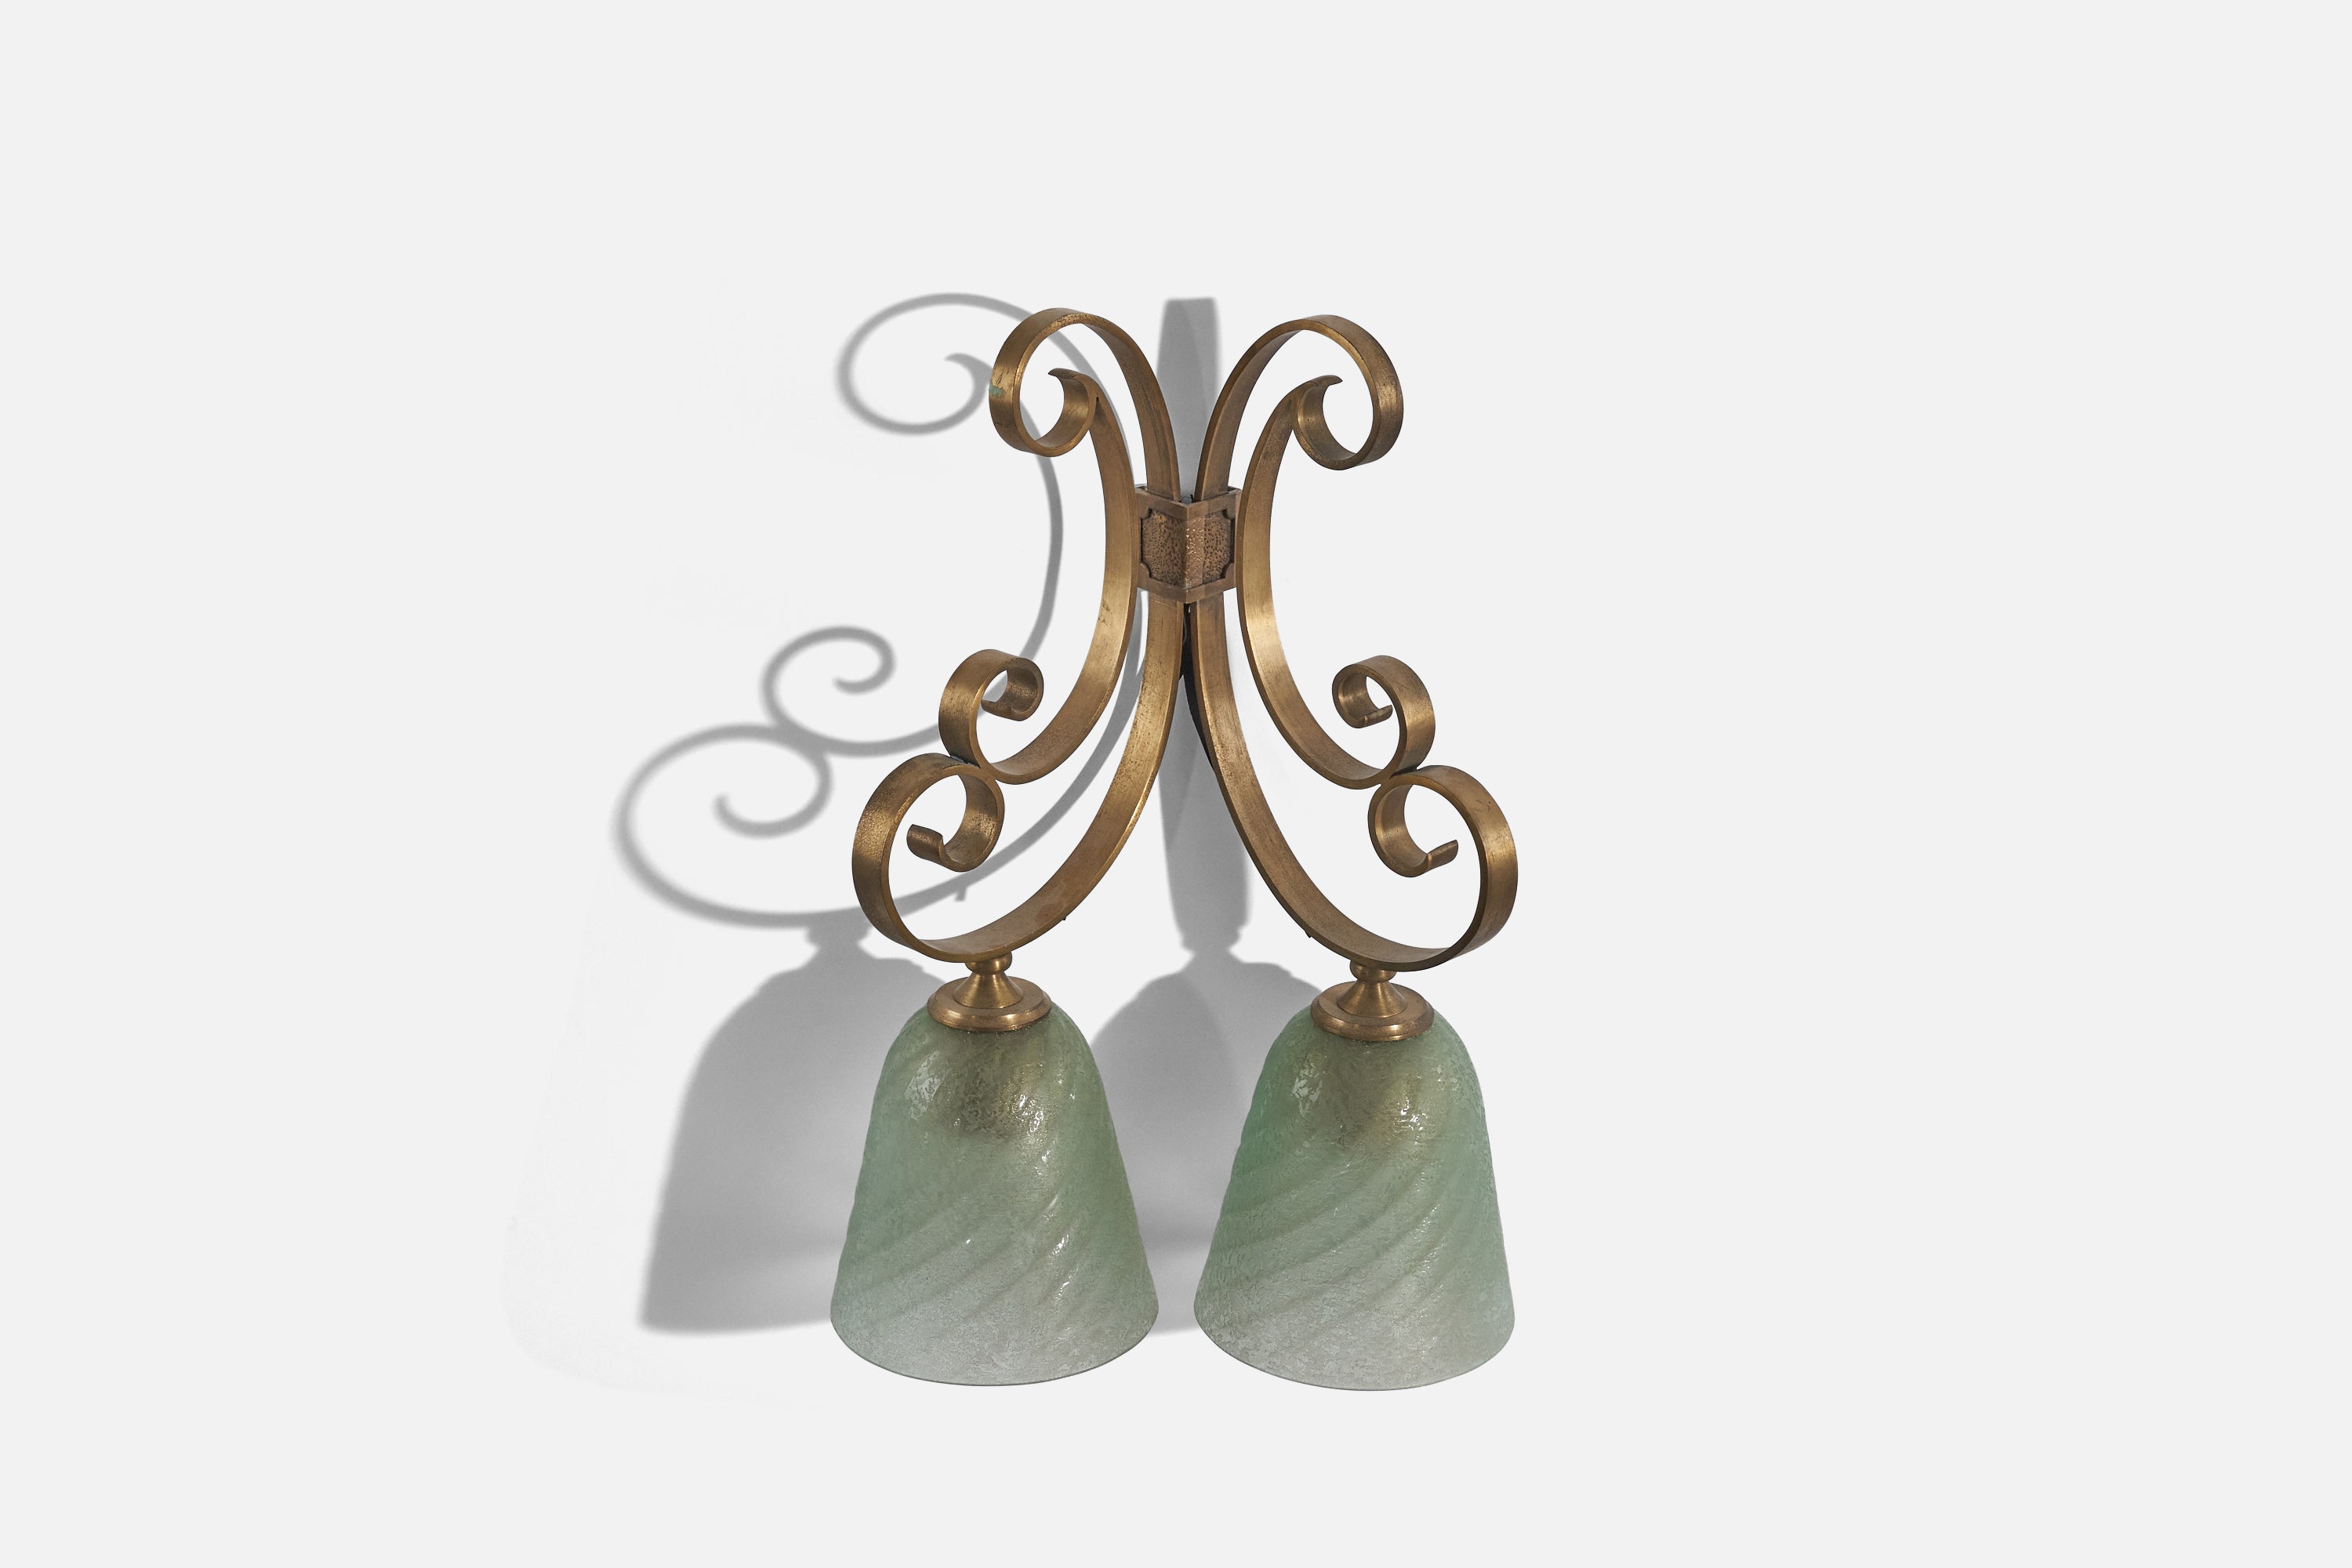 A pair of brass and glass wall lights designed and produced by an Italian designer, Italy, 1930s.

